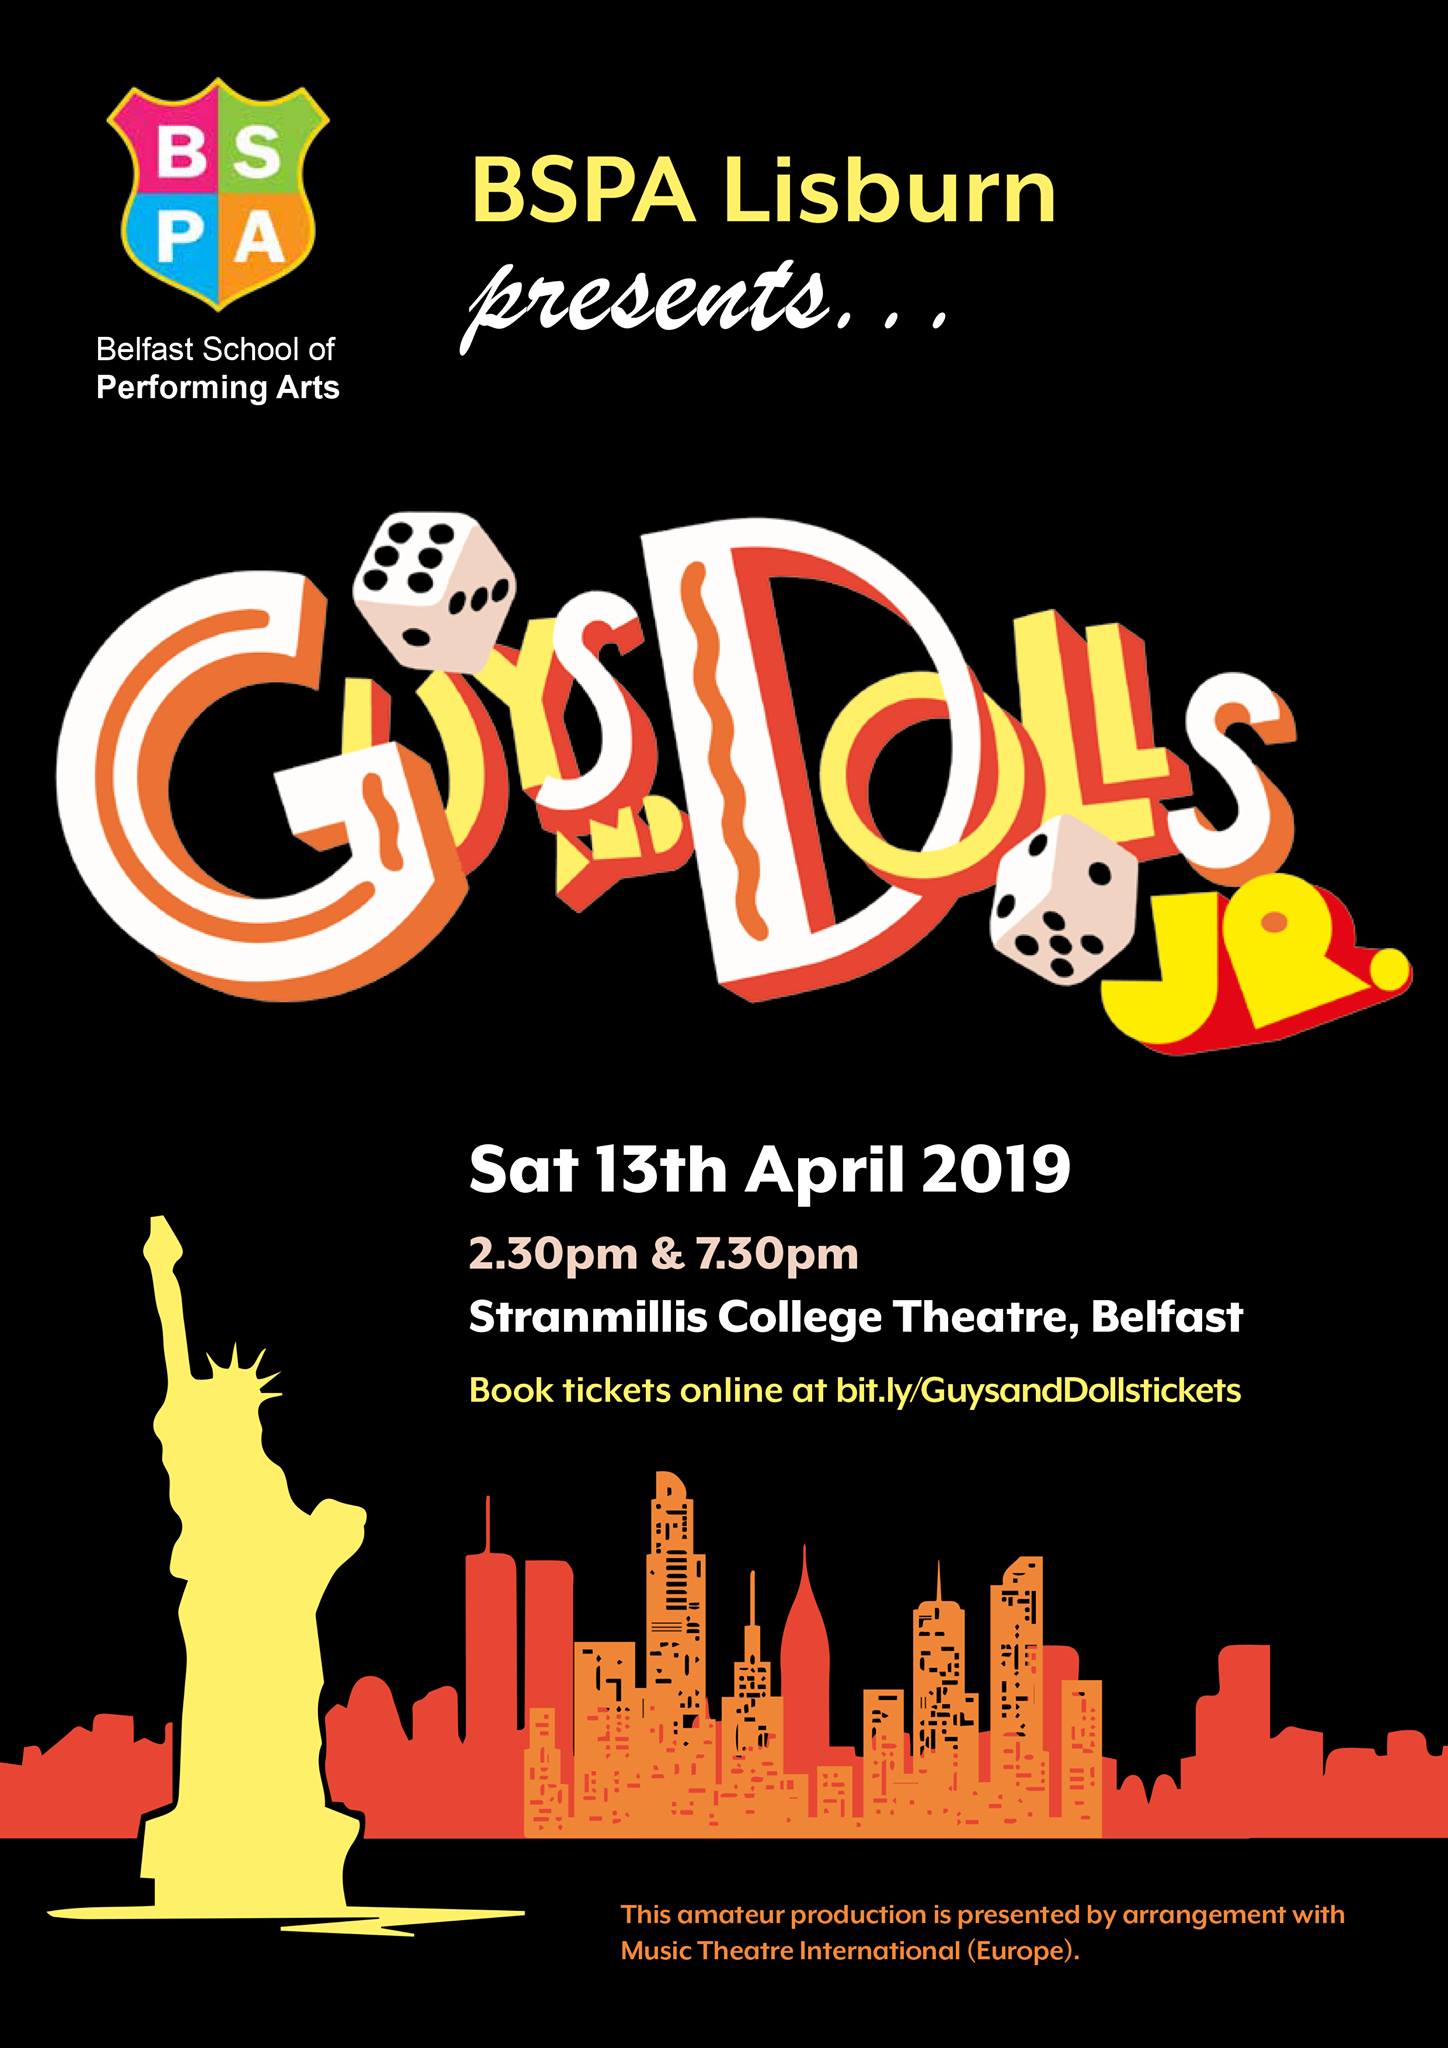 Guys and Dolls image